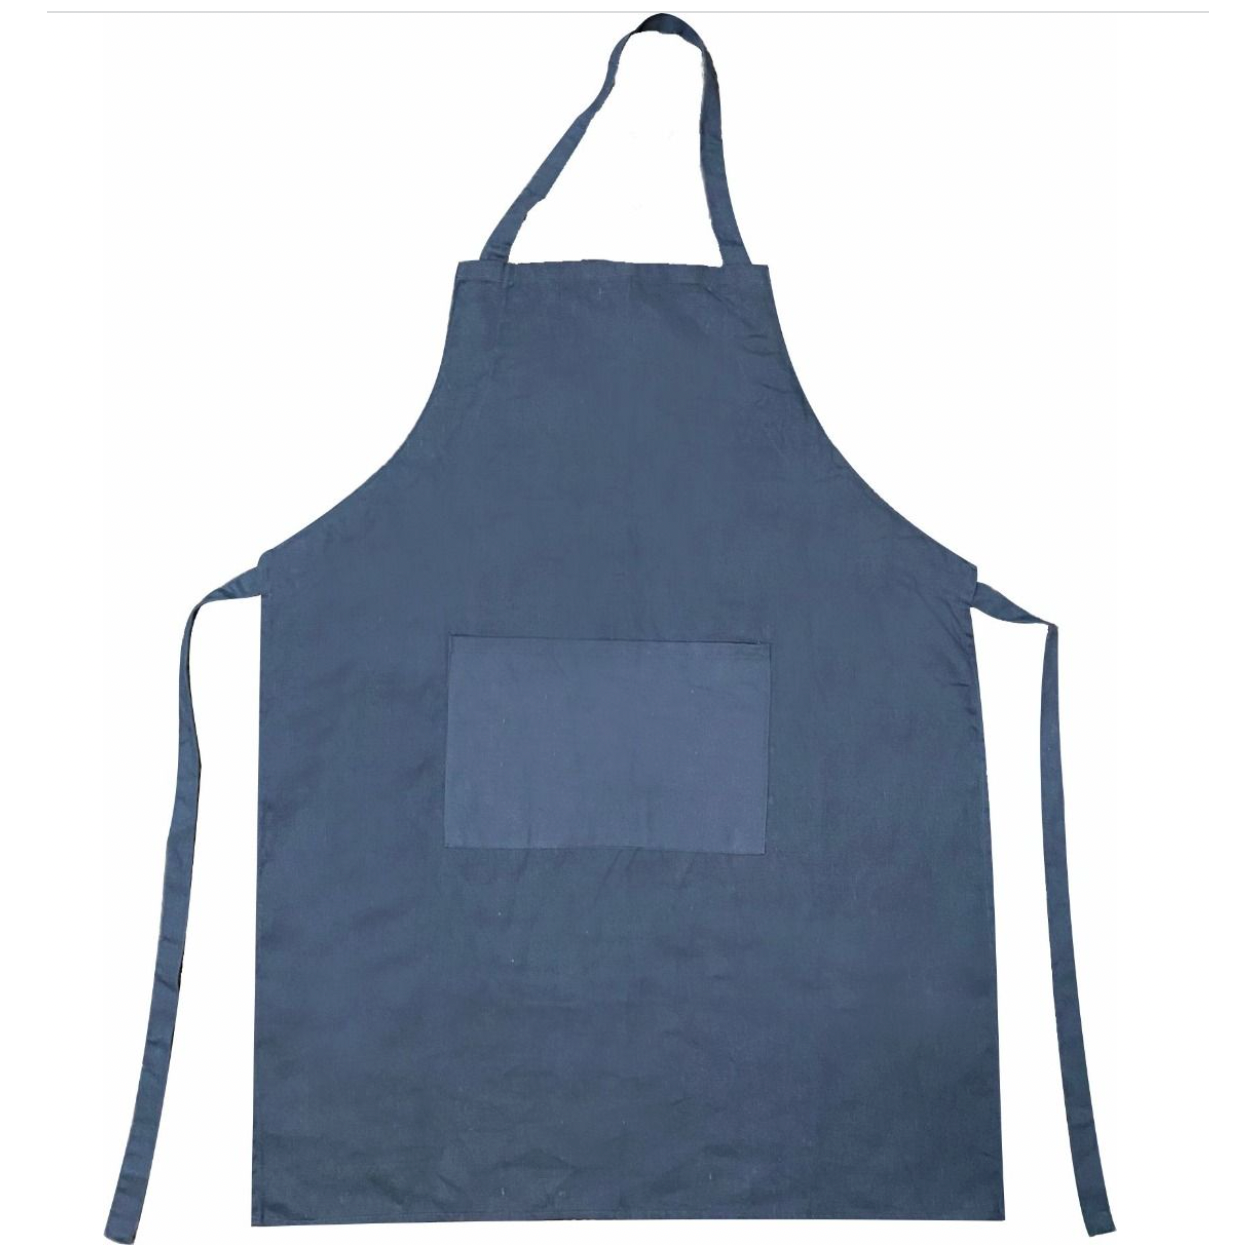 Student Apron with Adjustable  Strap - Navy Blue